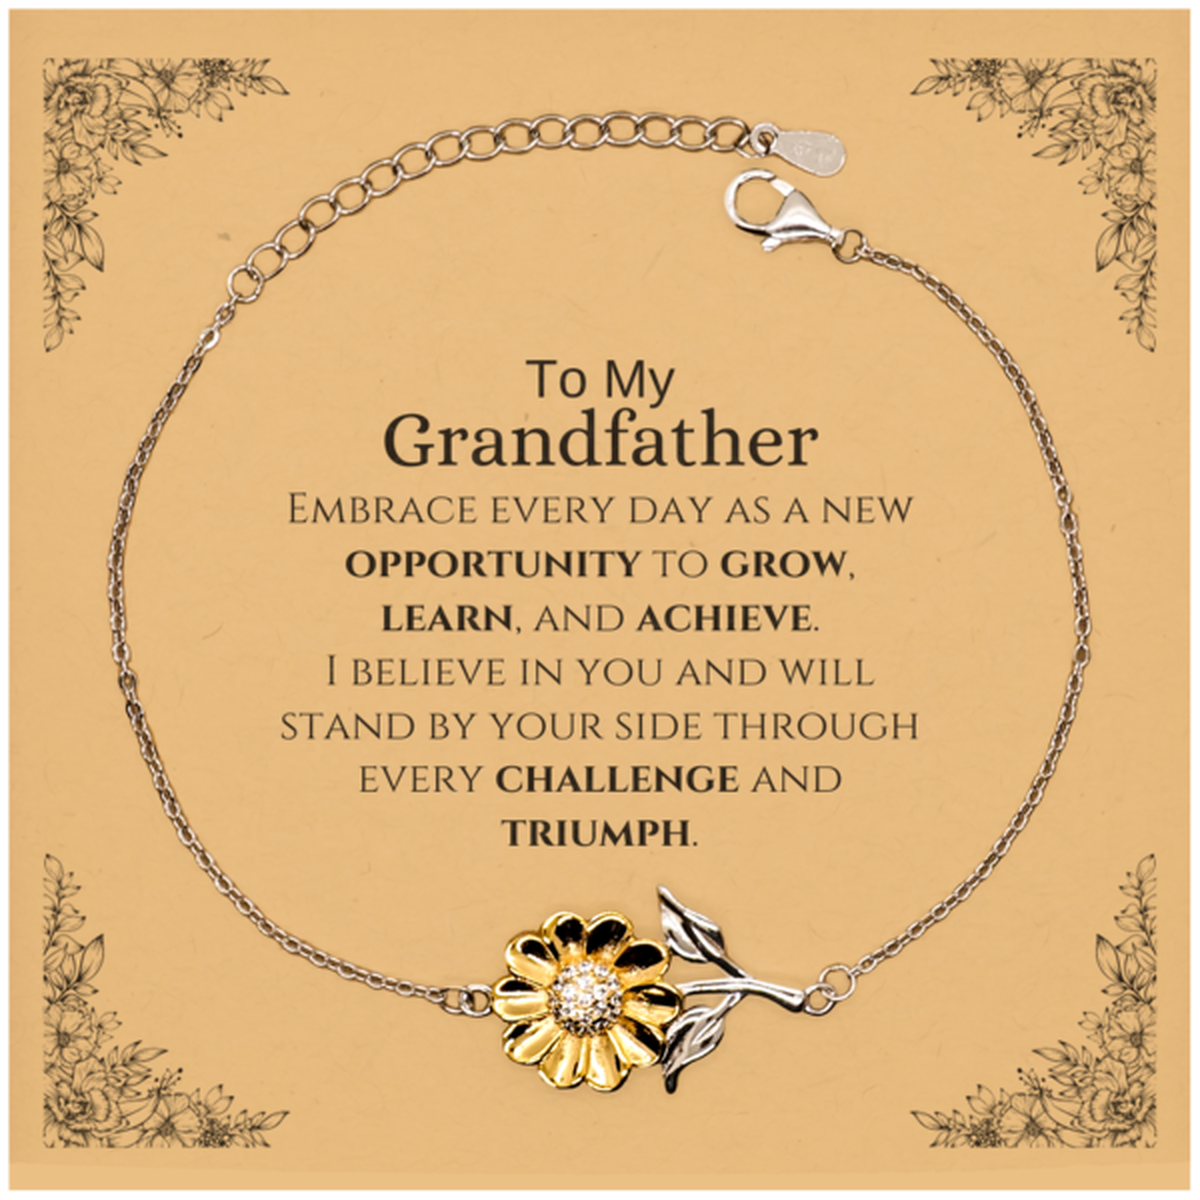 To My Grandfather Gifts, I believe in you and will stand by your side, Inspirational Sunflower Bracelet For Grandfather, Birthday Christmas Motivational Grandfather Gifts